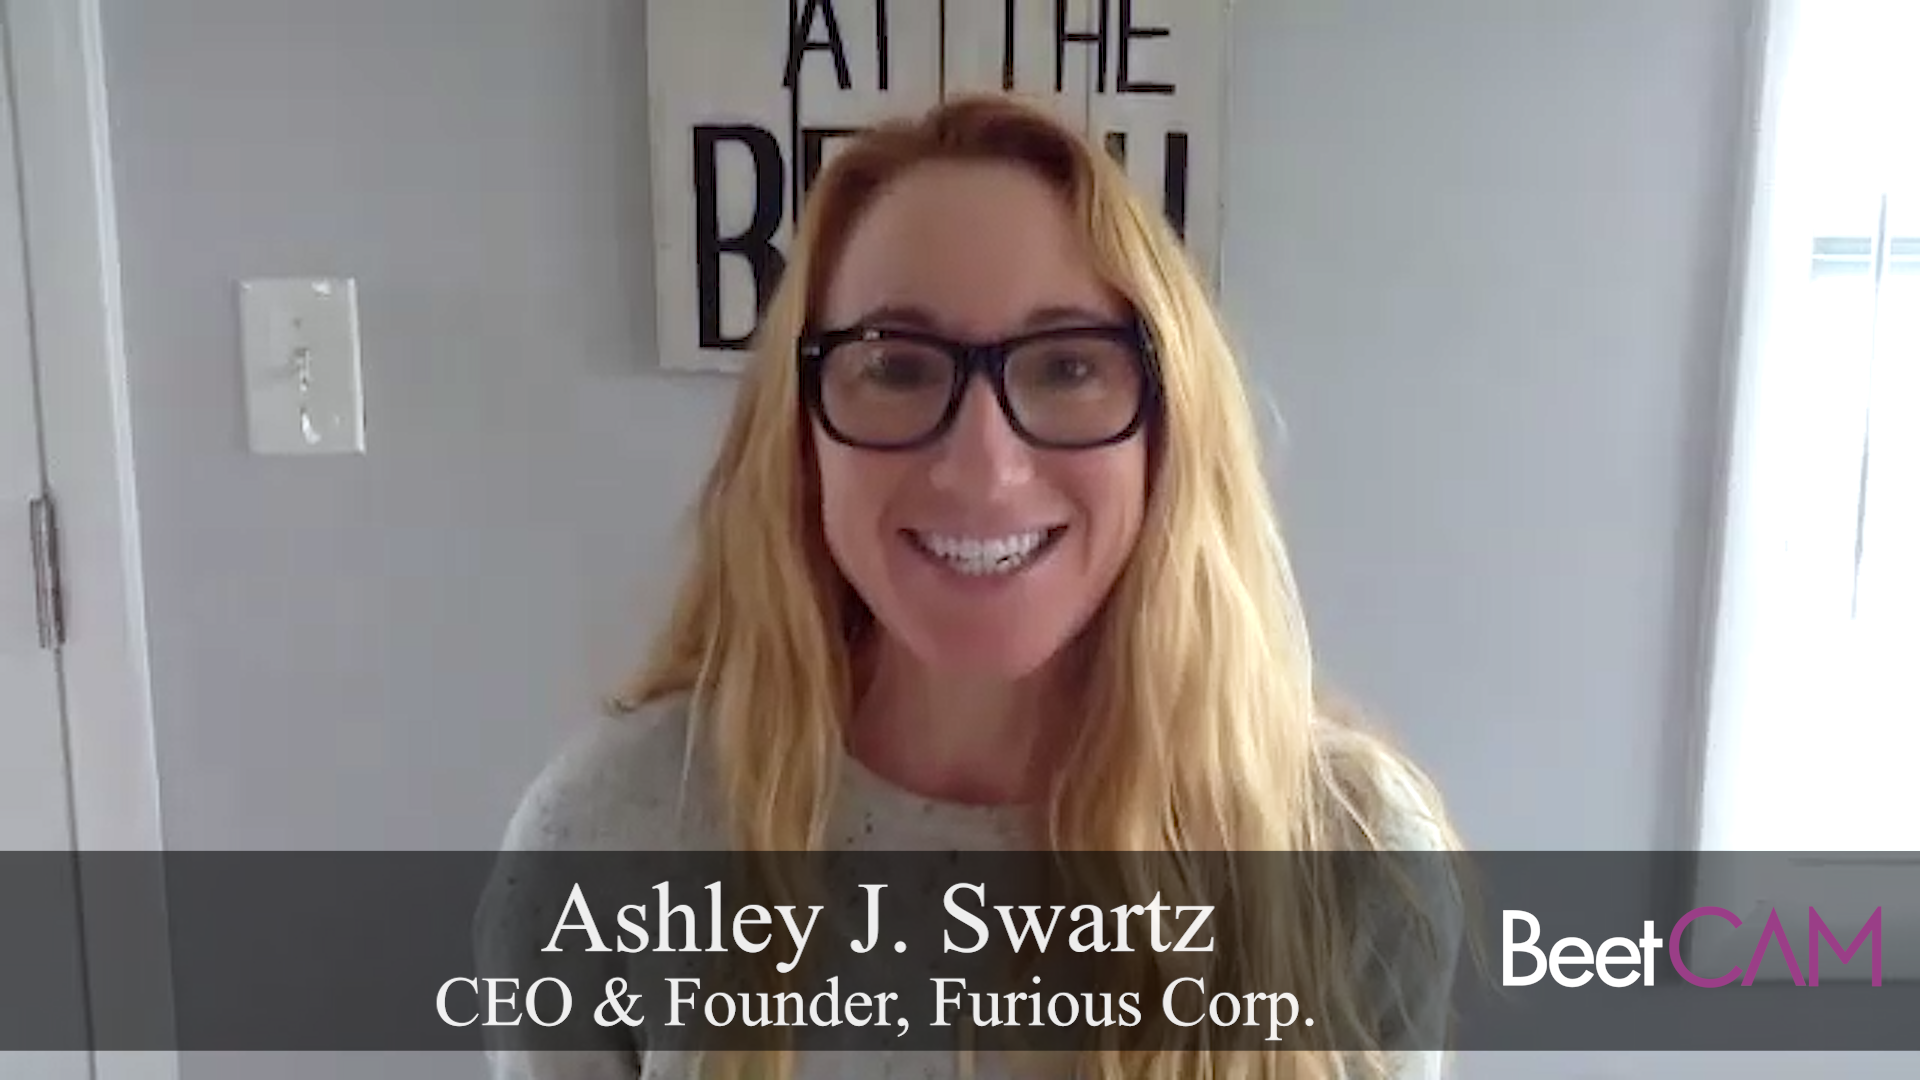 Ashley J. Swartz: ‘Work at a Distance, Yet Connect in a Meaningful Way’